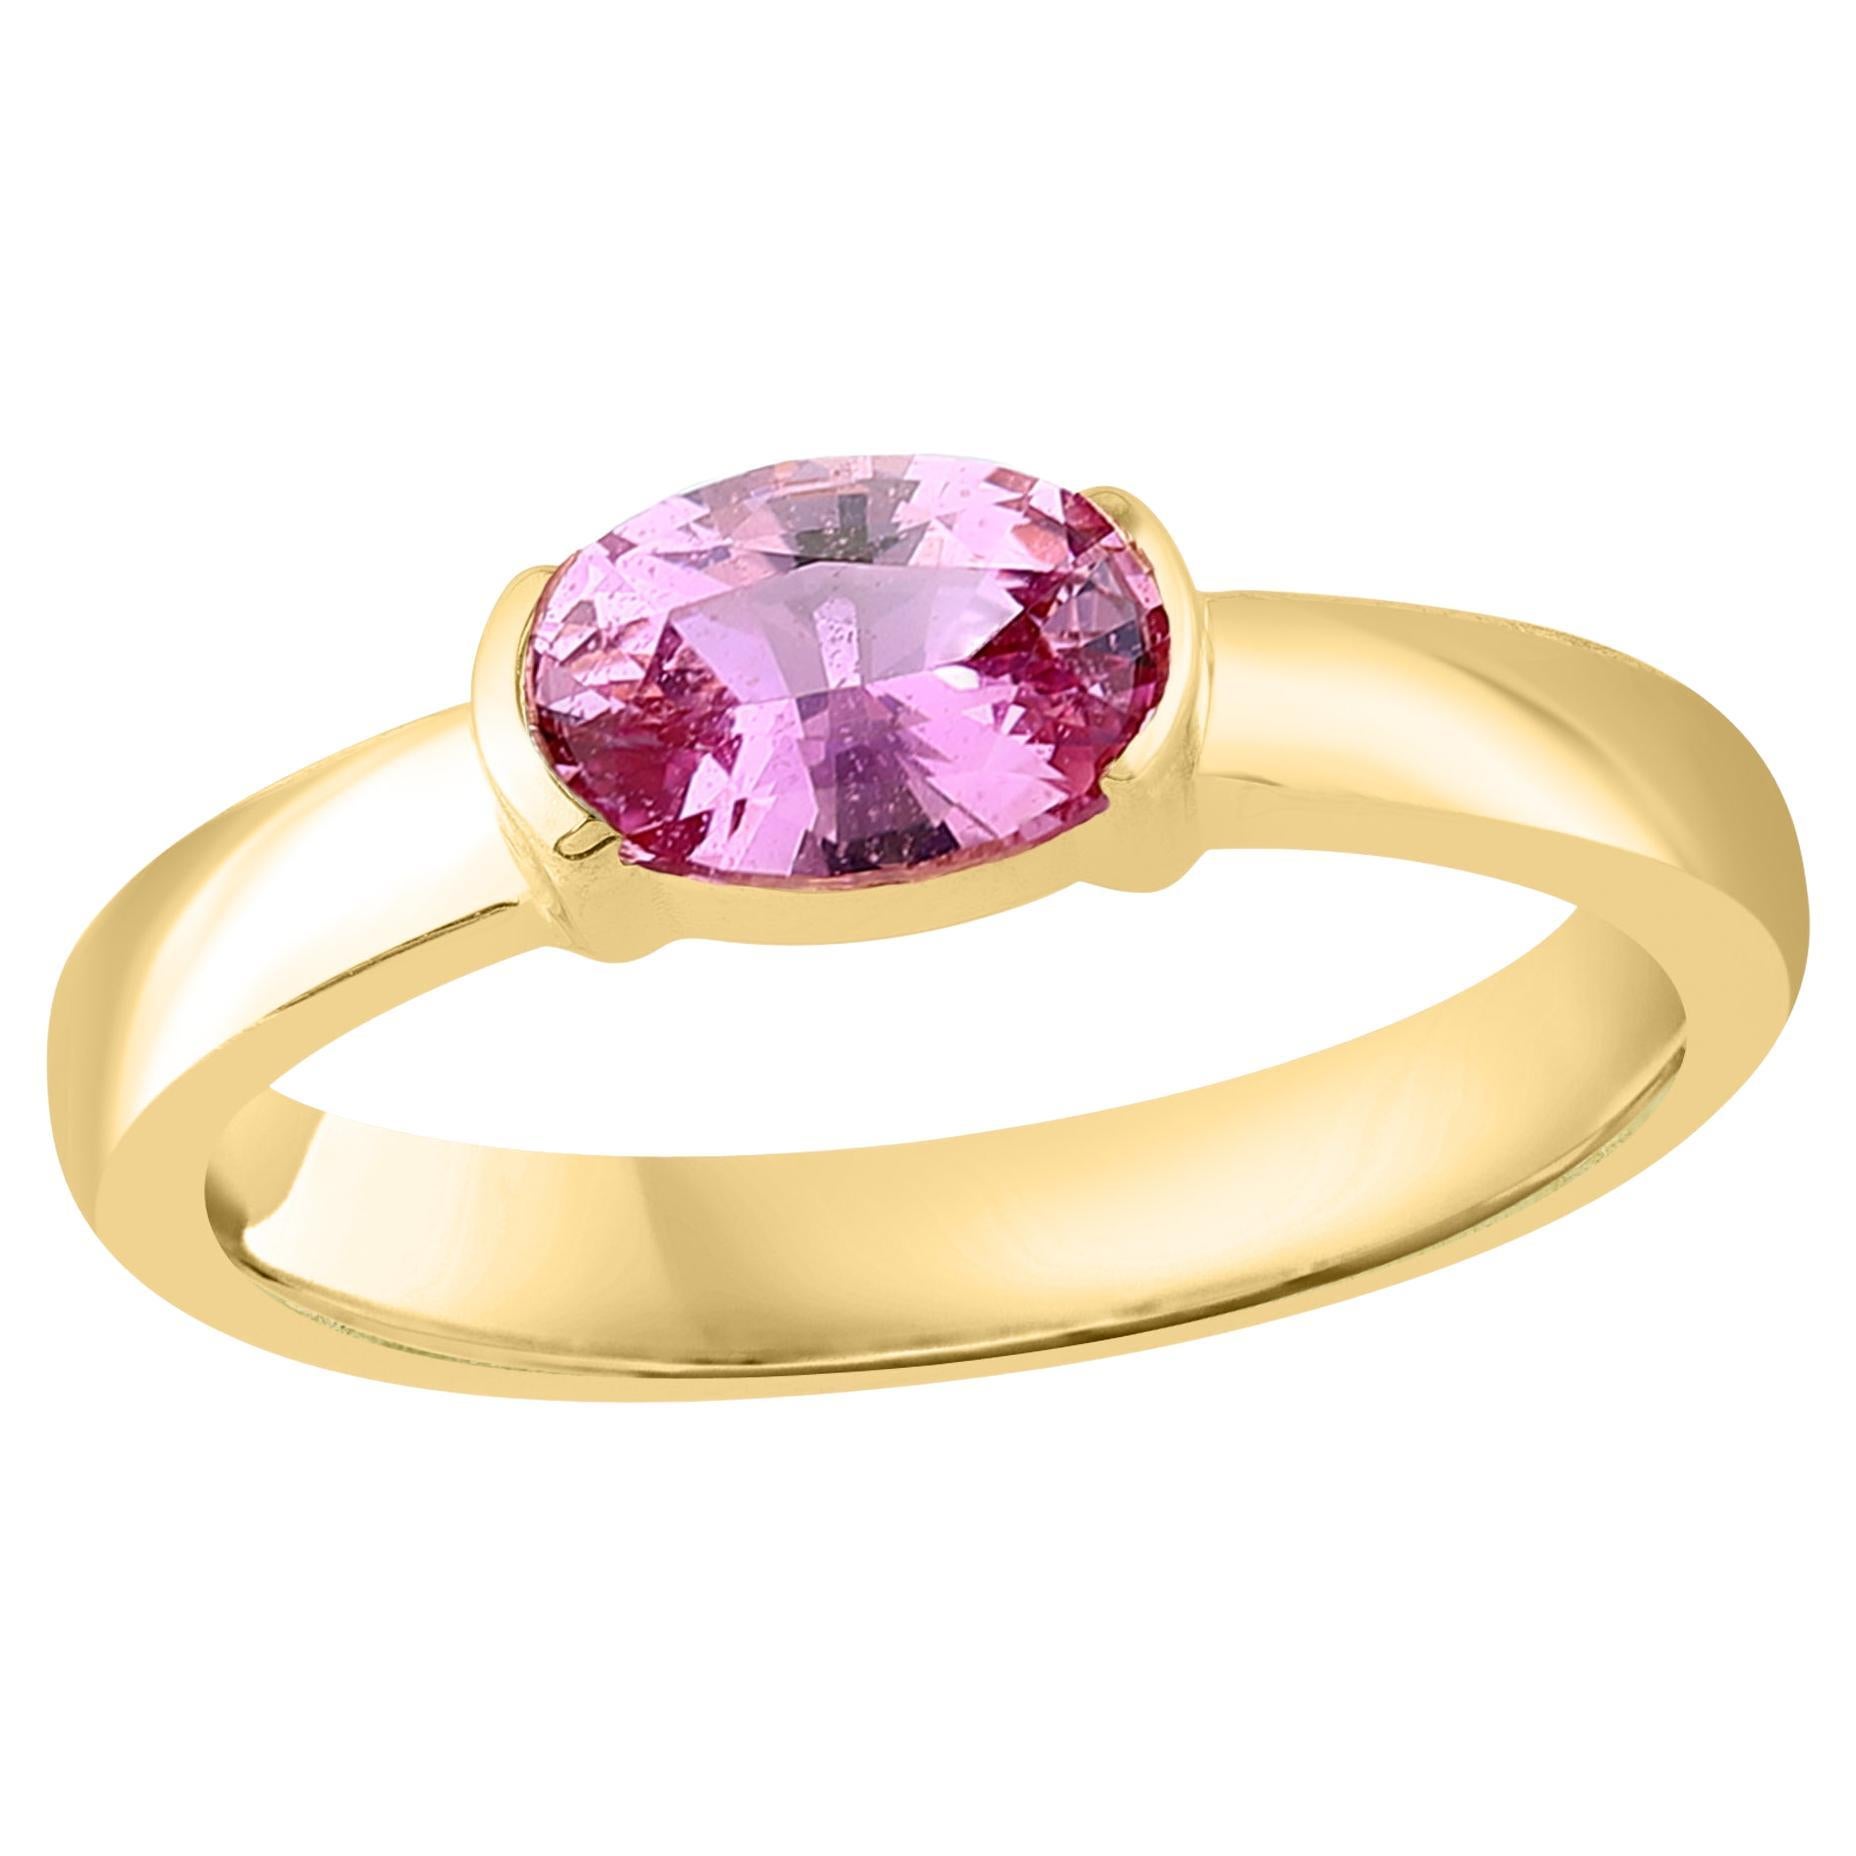 0.73 Carat Oval Cut Pink Sapphire Band Ring in 14K Yellow Gold For Sale